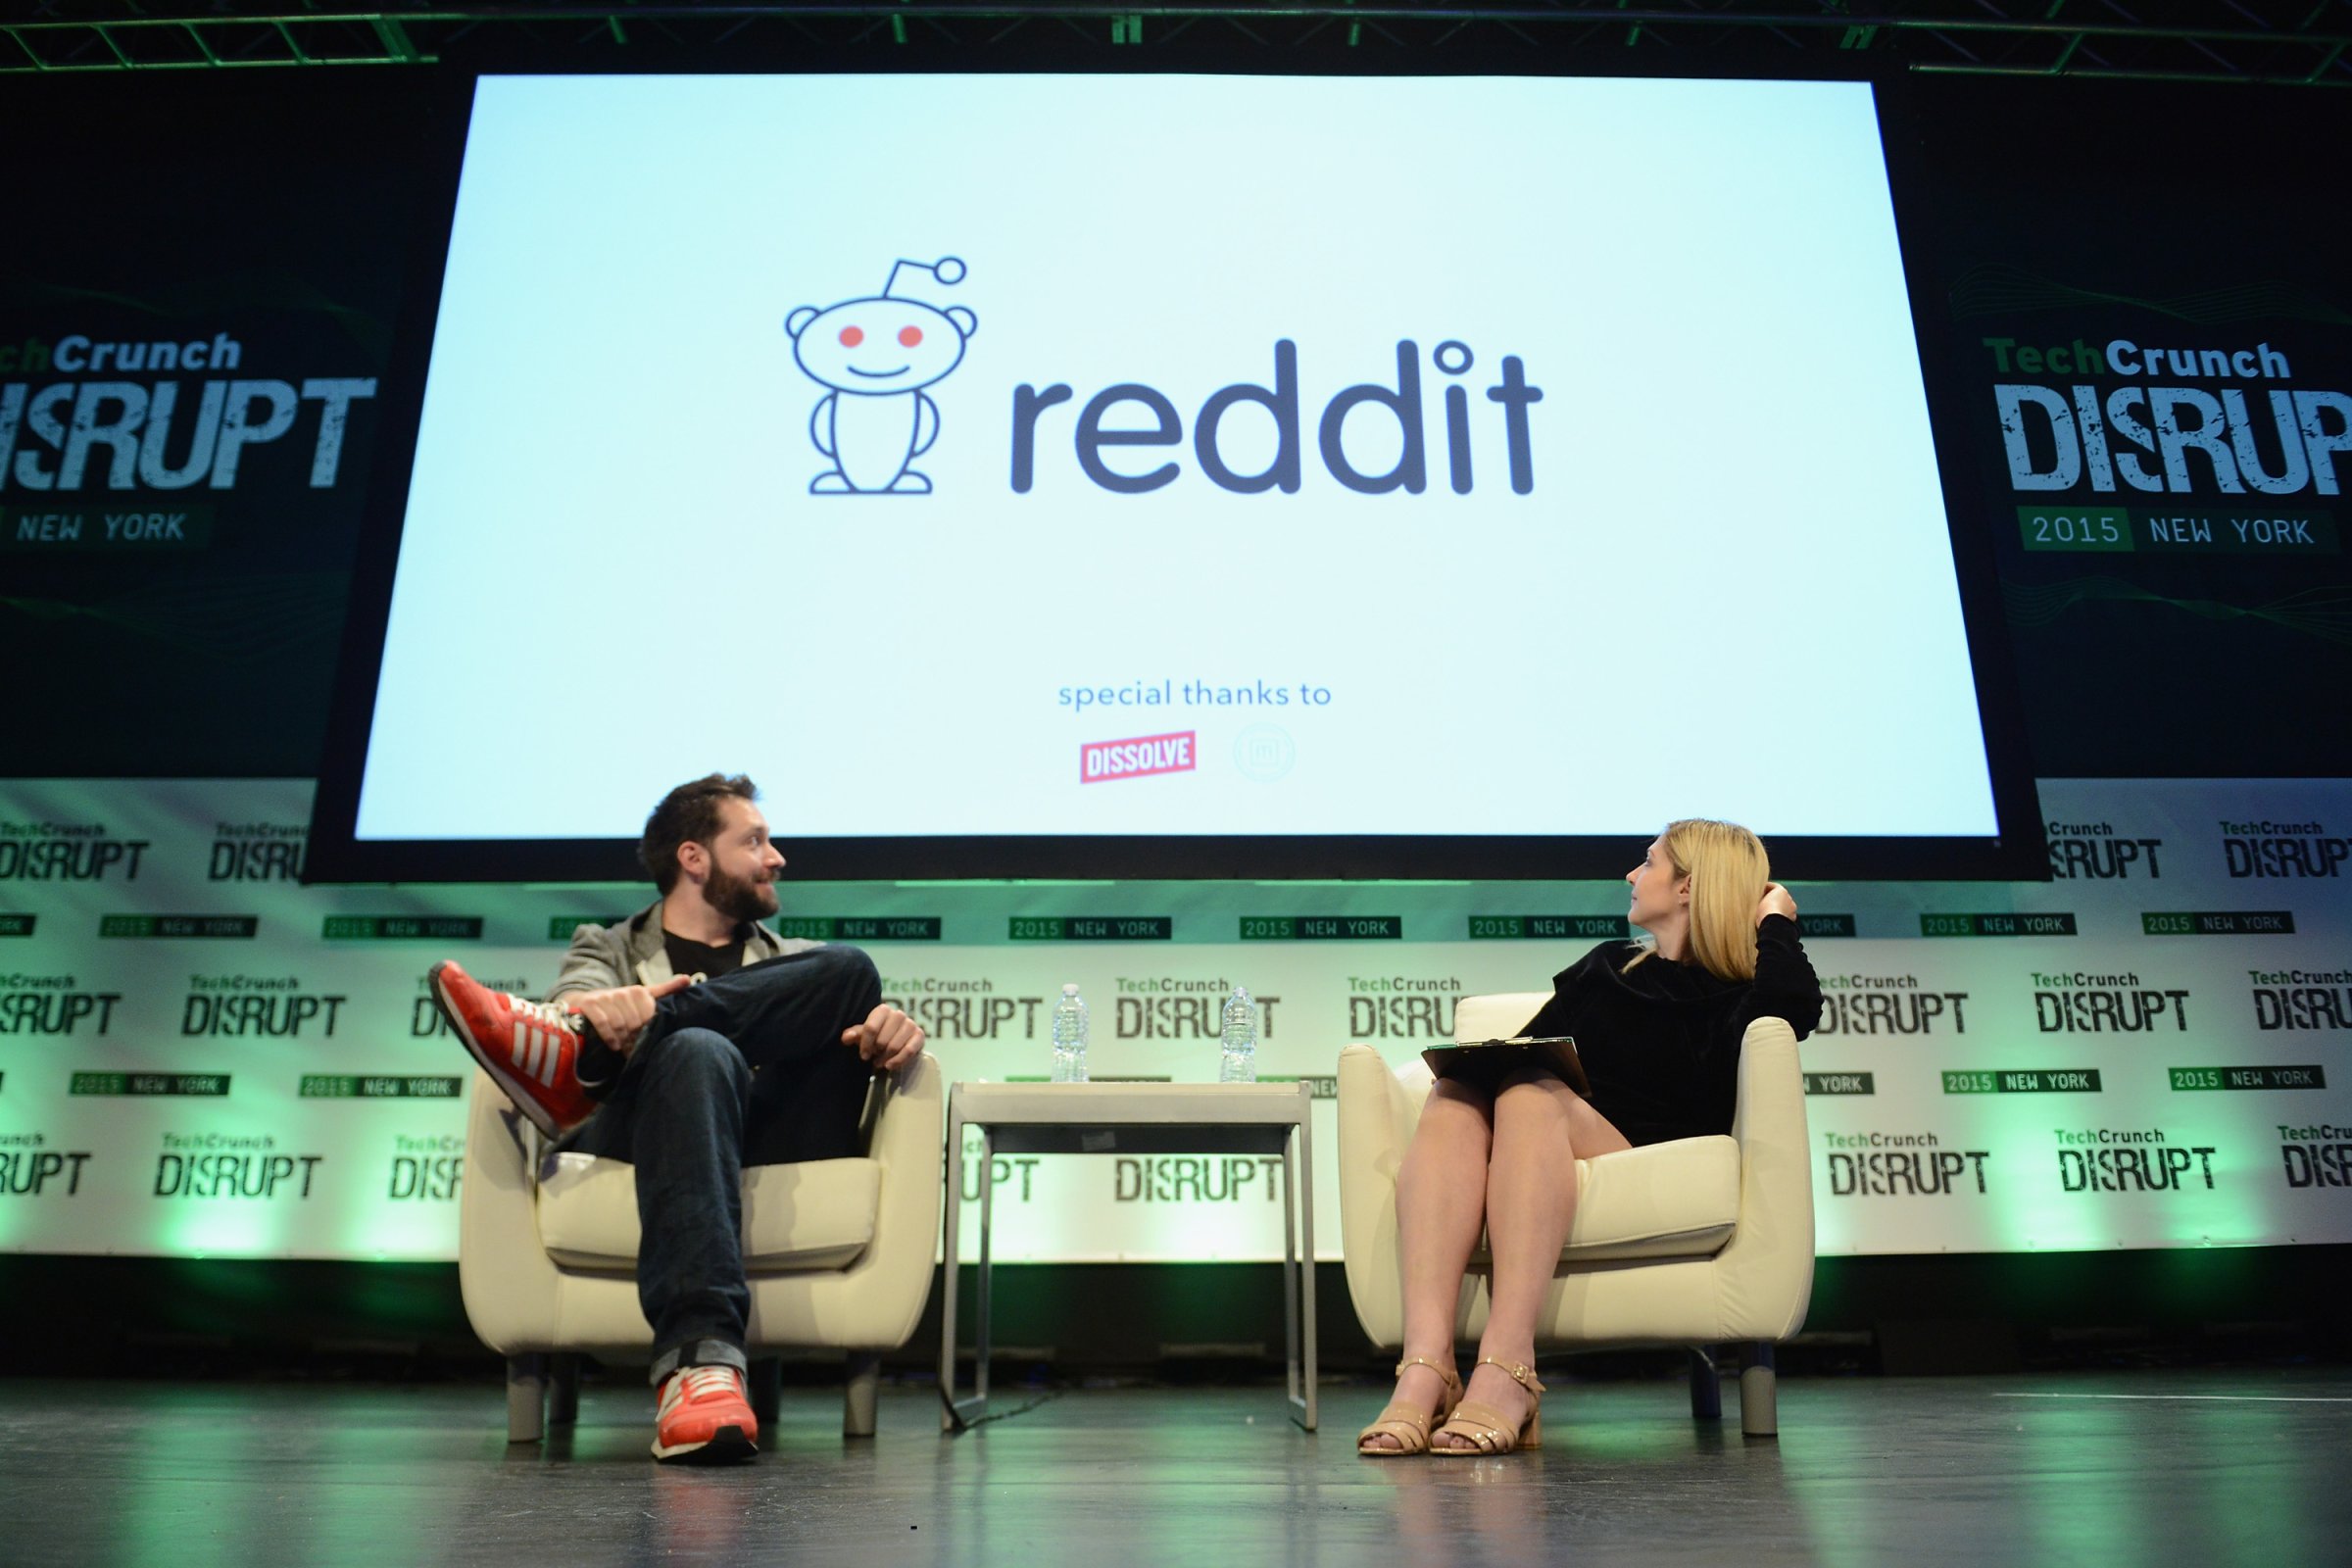 Co-Founder and Executive Chair of Reddit, and Partner at Y Combinator, Alexis Ohanian (L) and co-editor at TechCrunch, Alexia Tsotsis appear onstage during TechCrunch Disrupt NY 2015 - Day 3 at The Manhattan Center on May 6, 2015 in New York City.